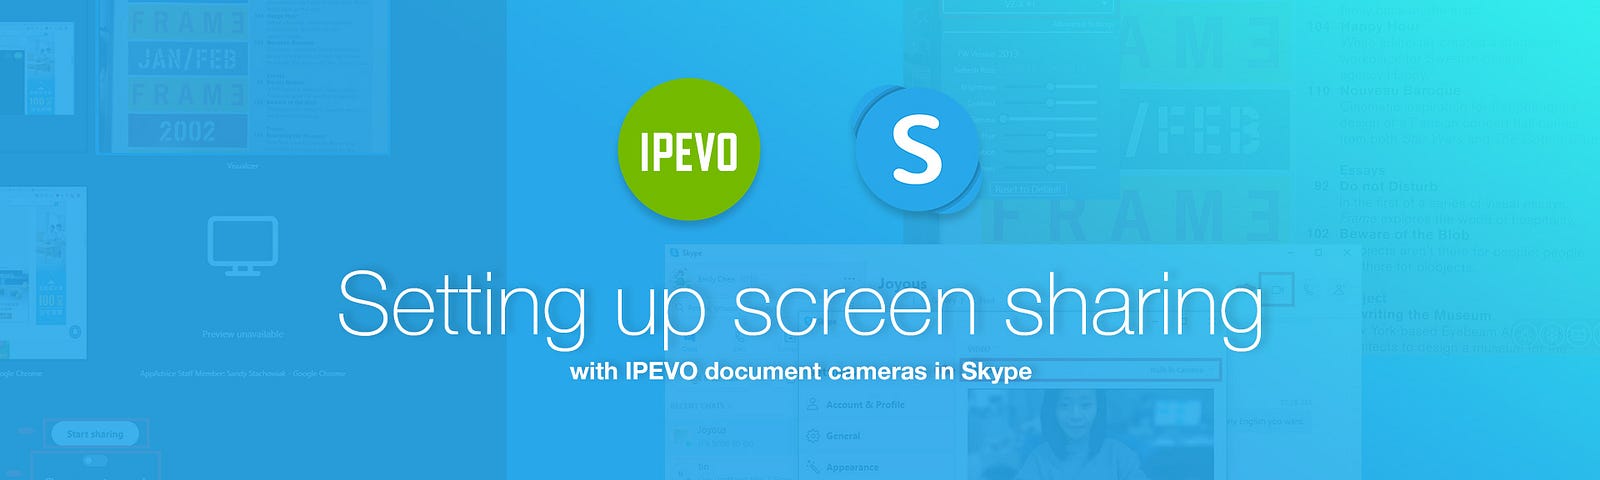 Setting up screen sharing with IPEVO document cameras in Skype